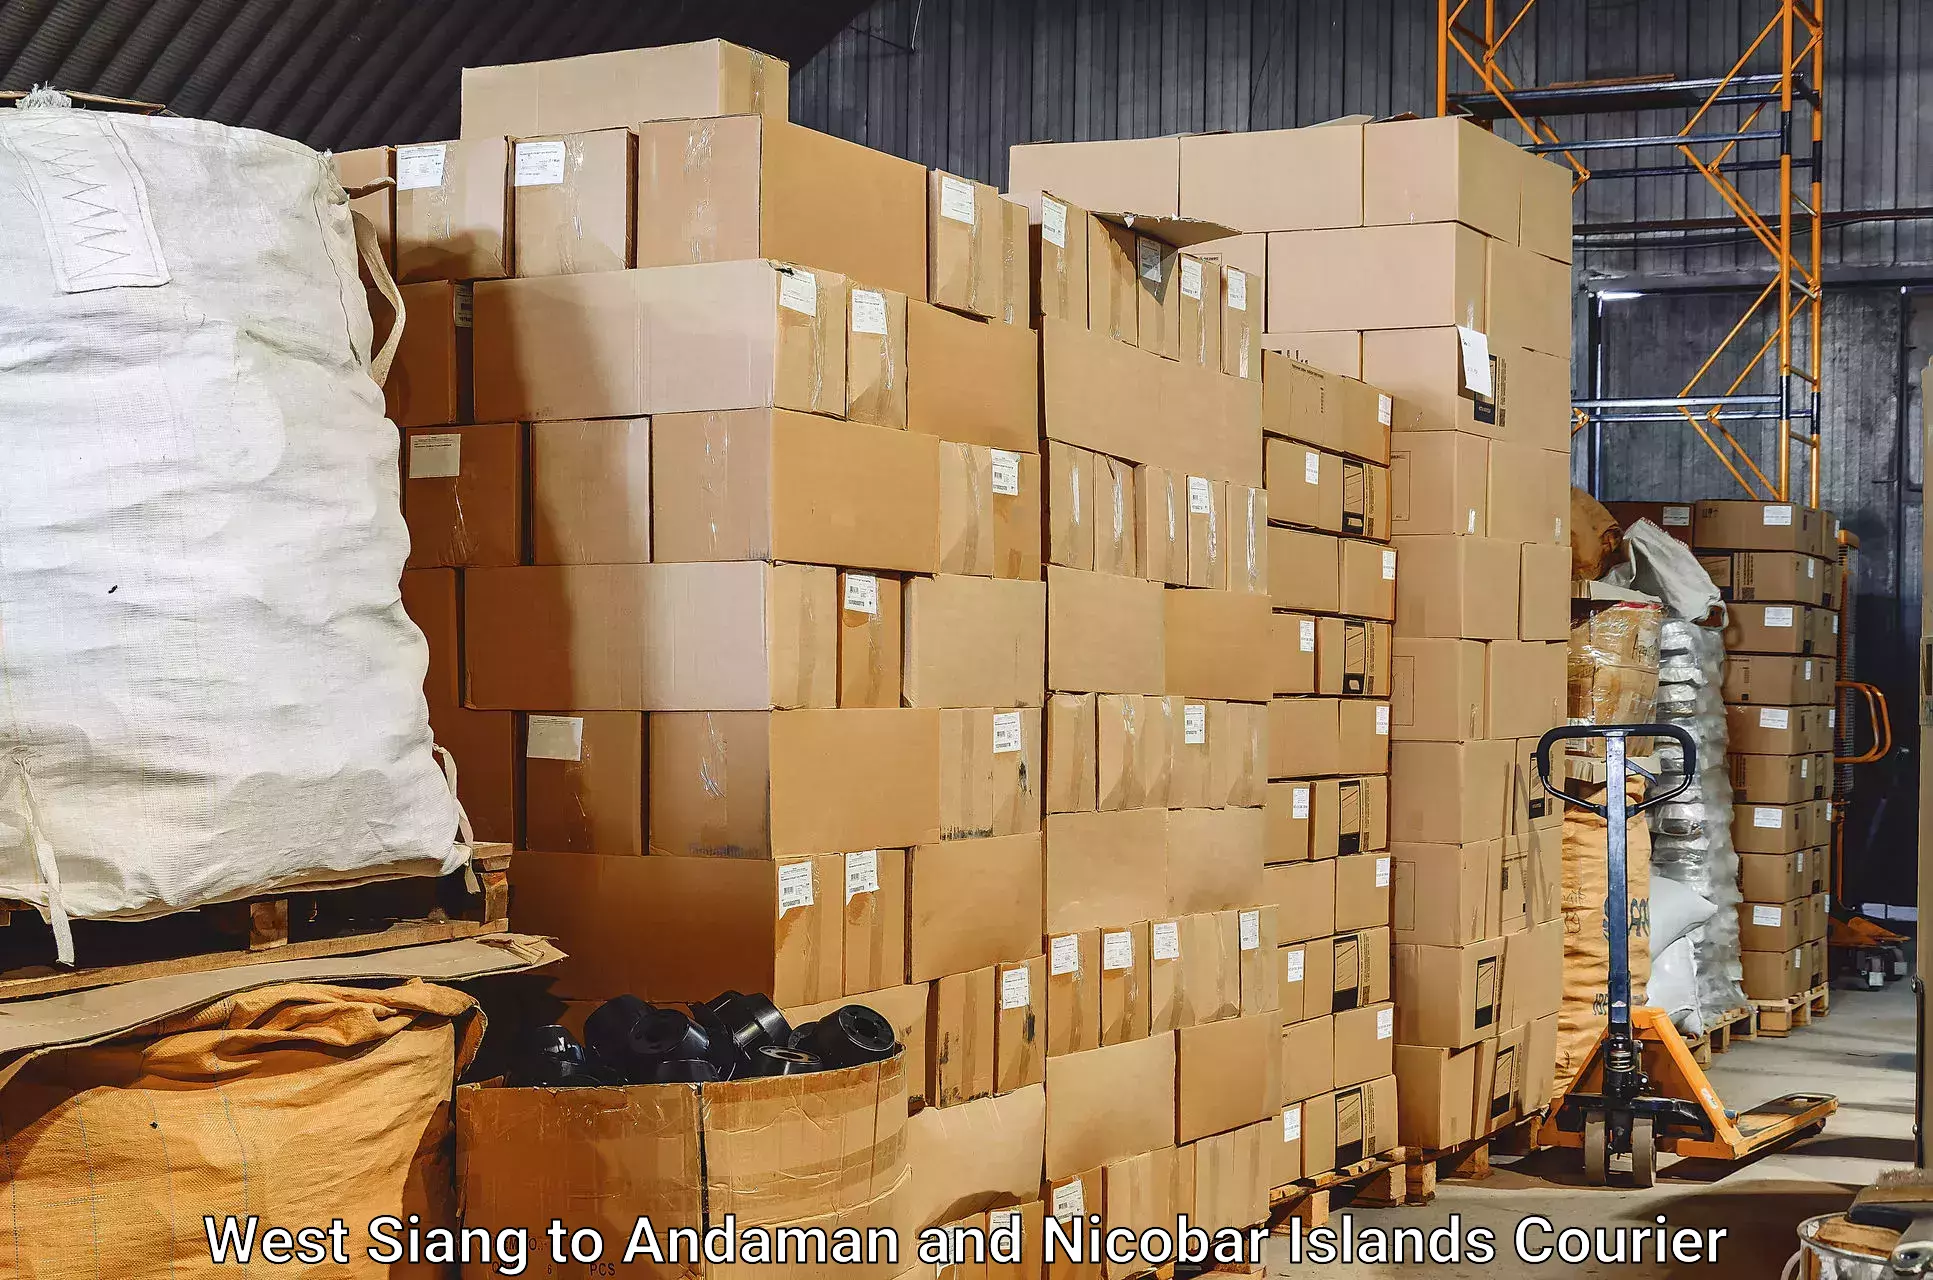 High-quality baggage shipment in West Siang to Andaman and Nicobar Islands